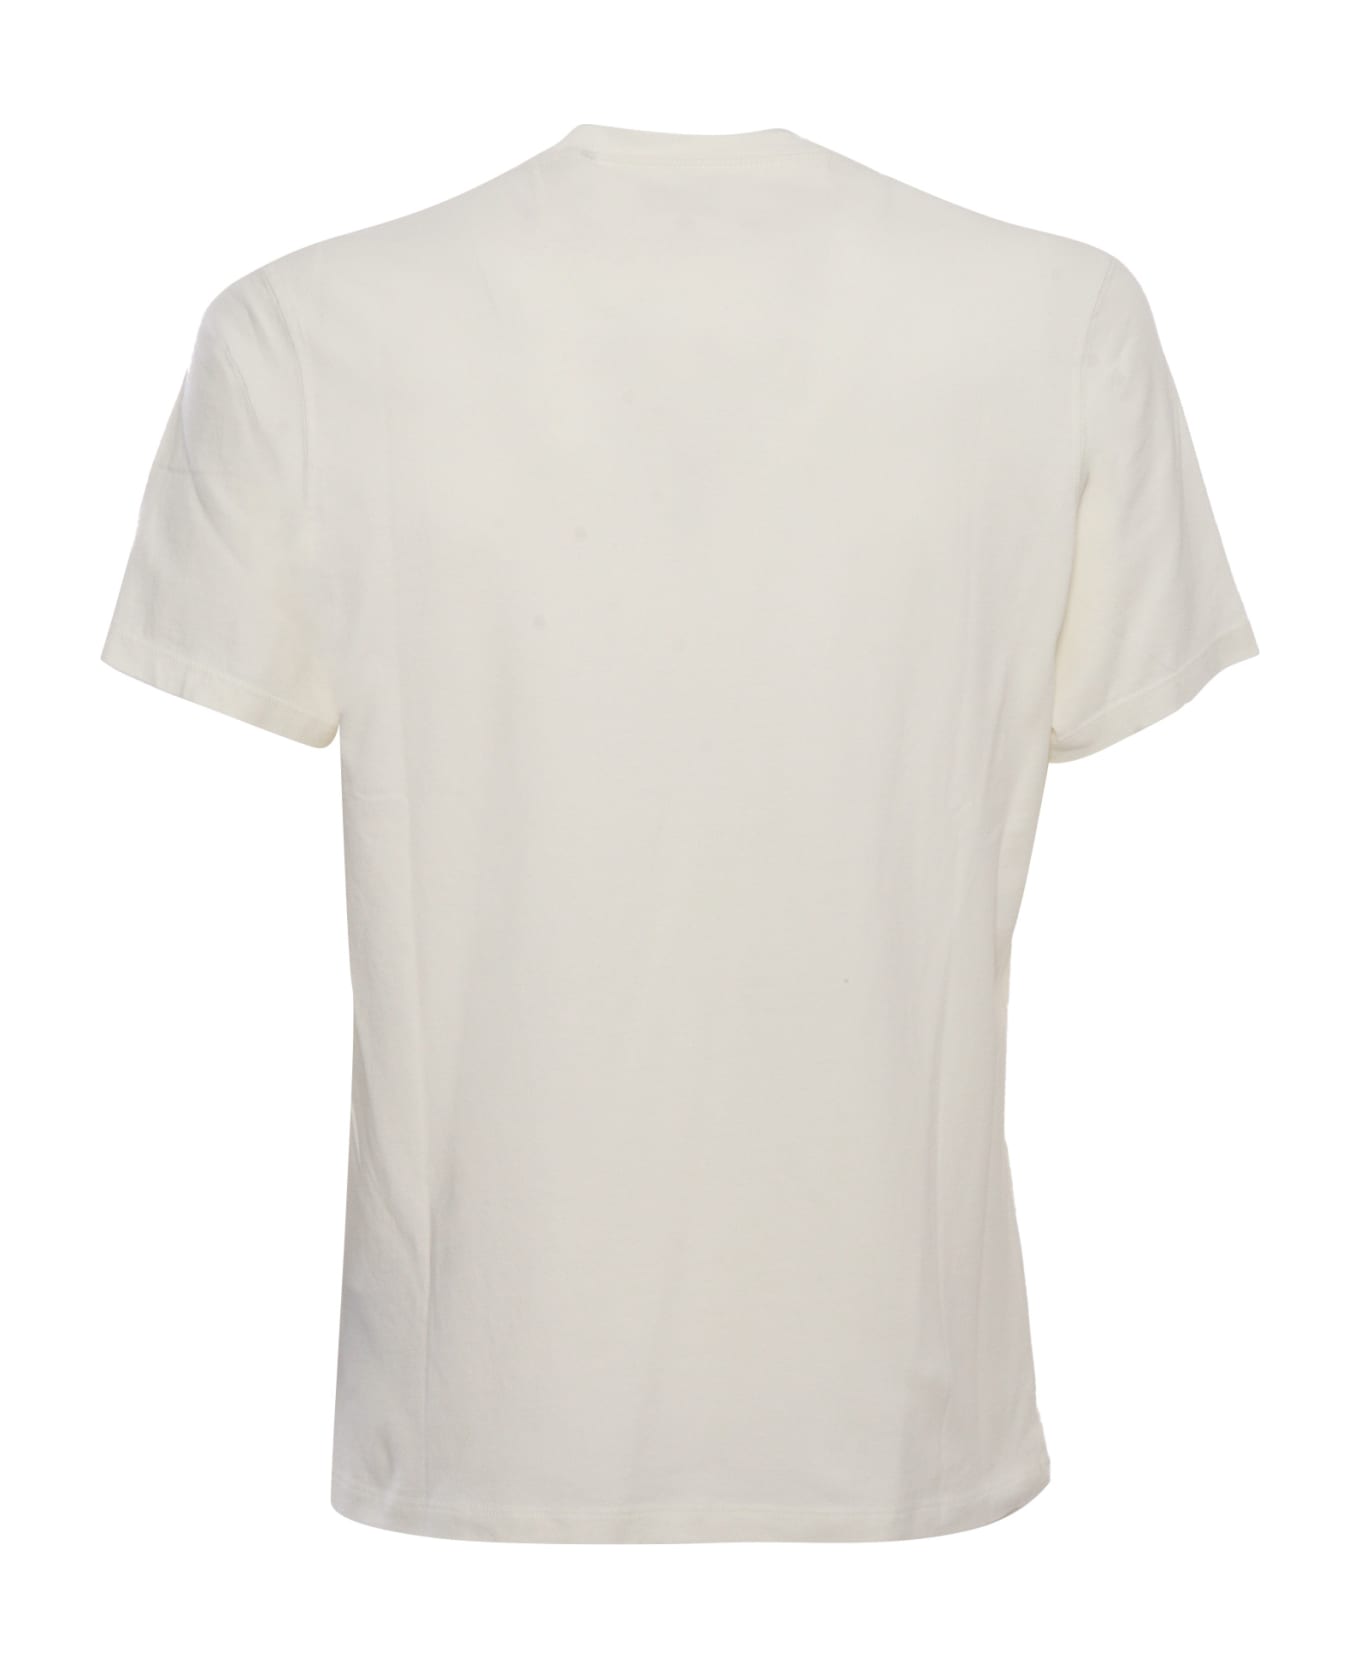 Barbour Beige T-shirt With Print - WHITE